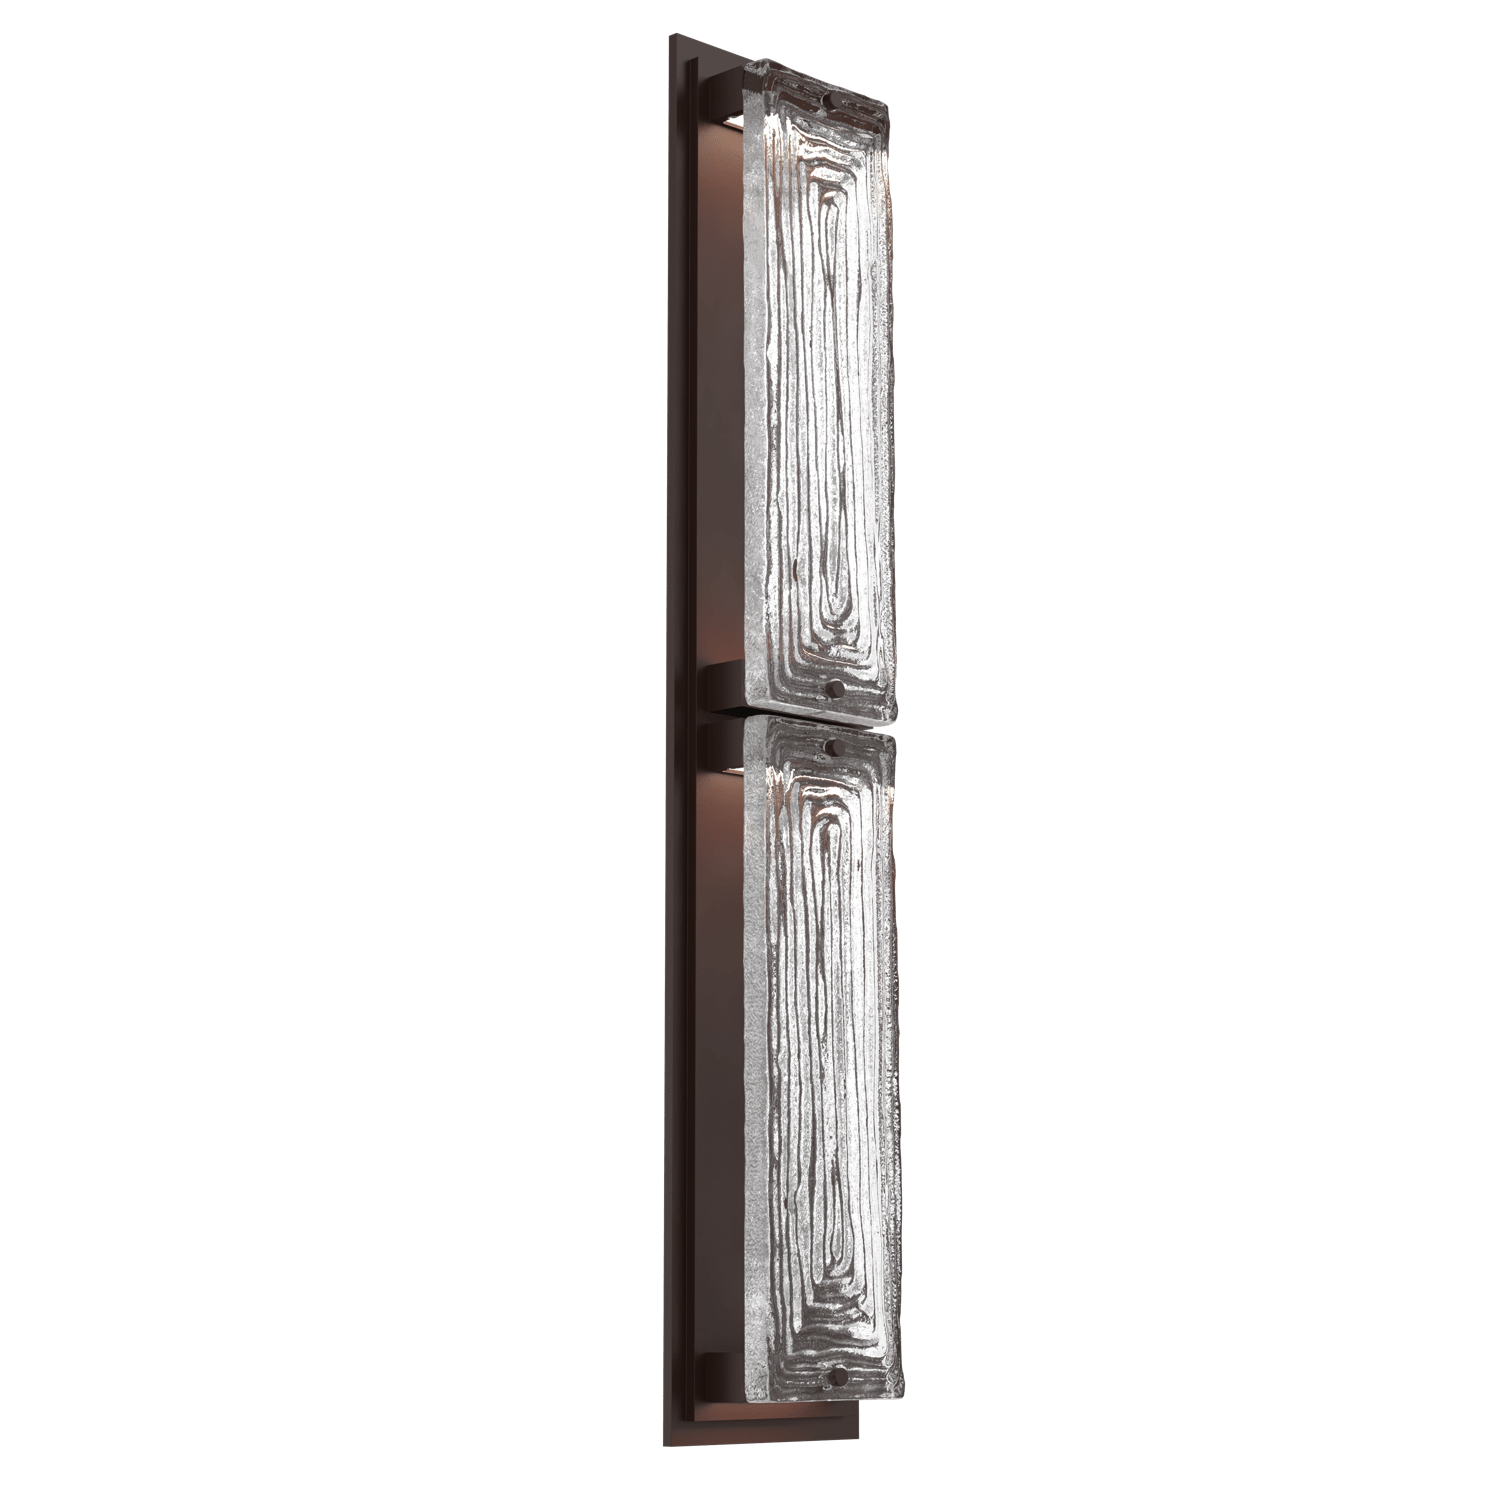 ODB0090-02-SB-TL-Hammerton-Studio-Tabulo-28-inch-outdoor-sconce-with-statuary-bronze-finish-and-clear-linea-cast-glass-shade-and-LED-lamping